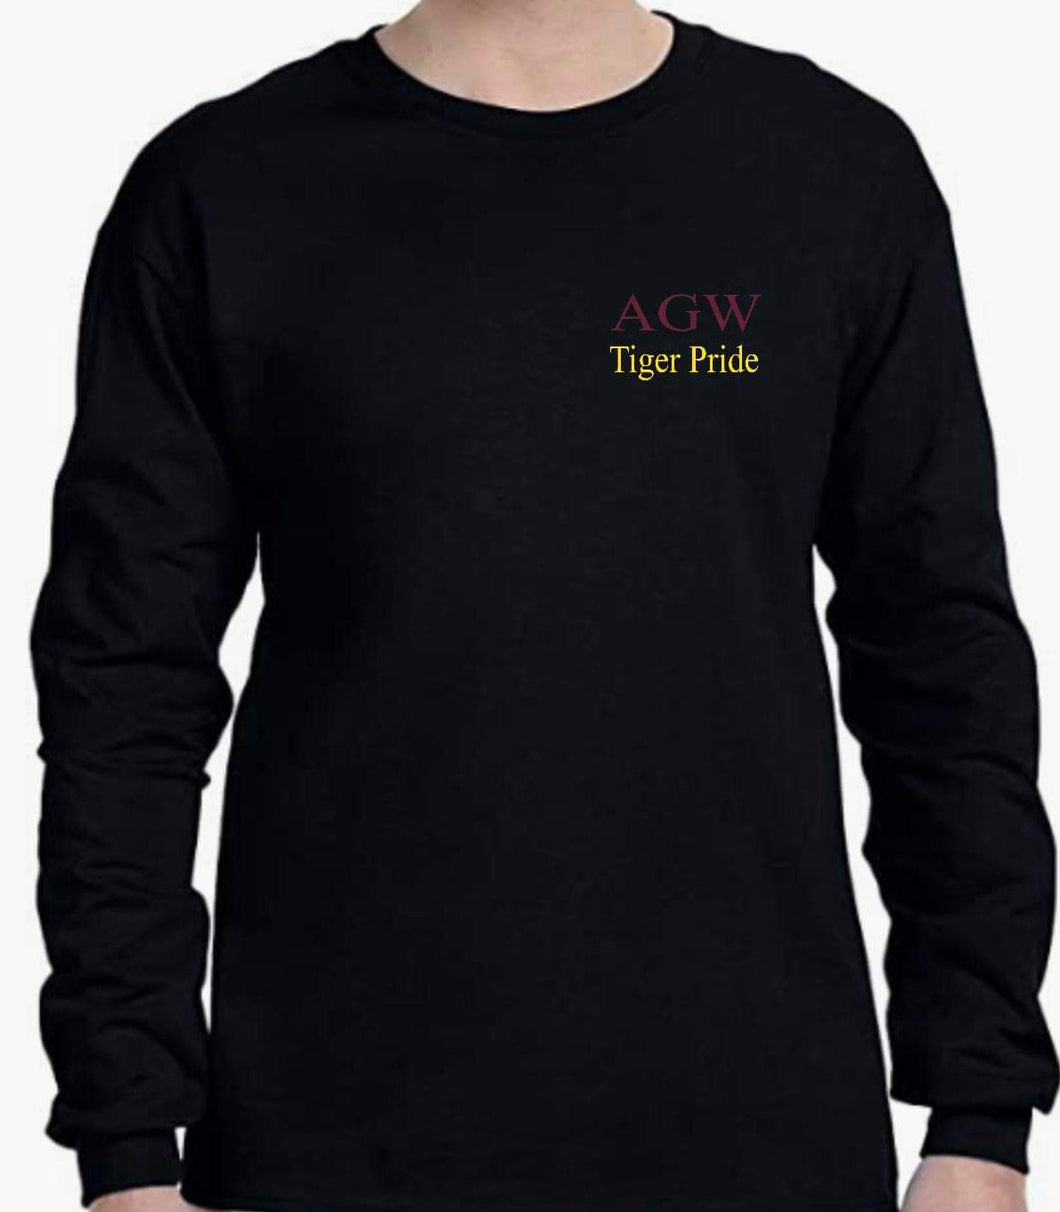 Black Long Sleeve Shirt with AGW embroidery in maroon thread and Tiger Pride in yellow gold